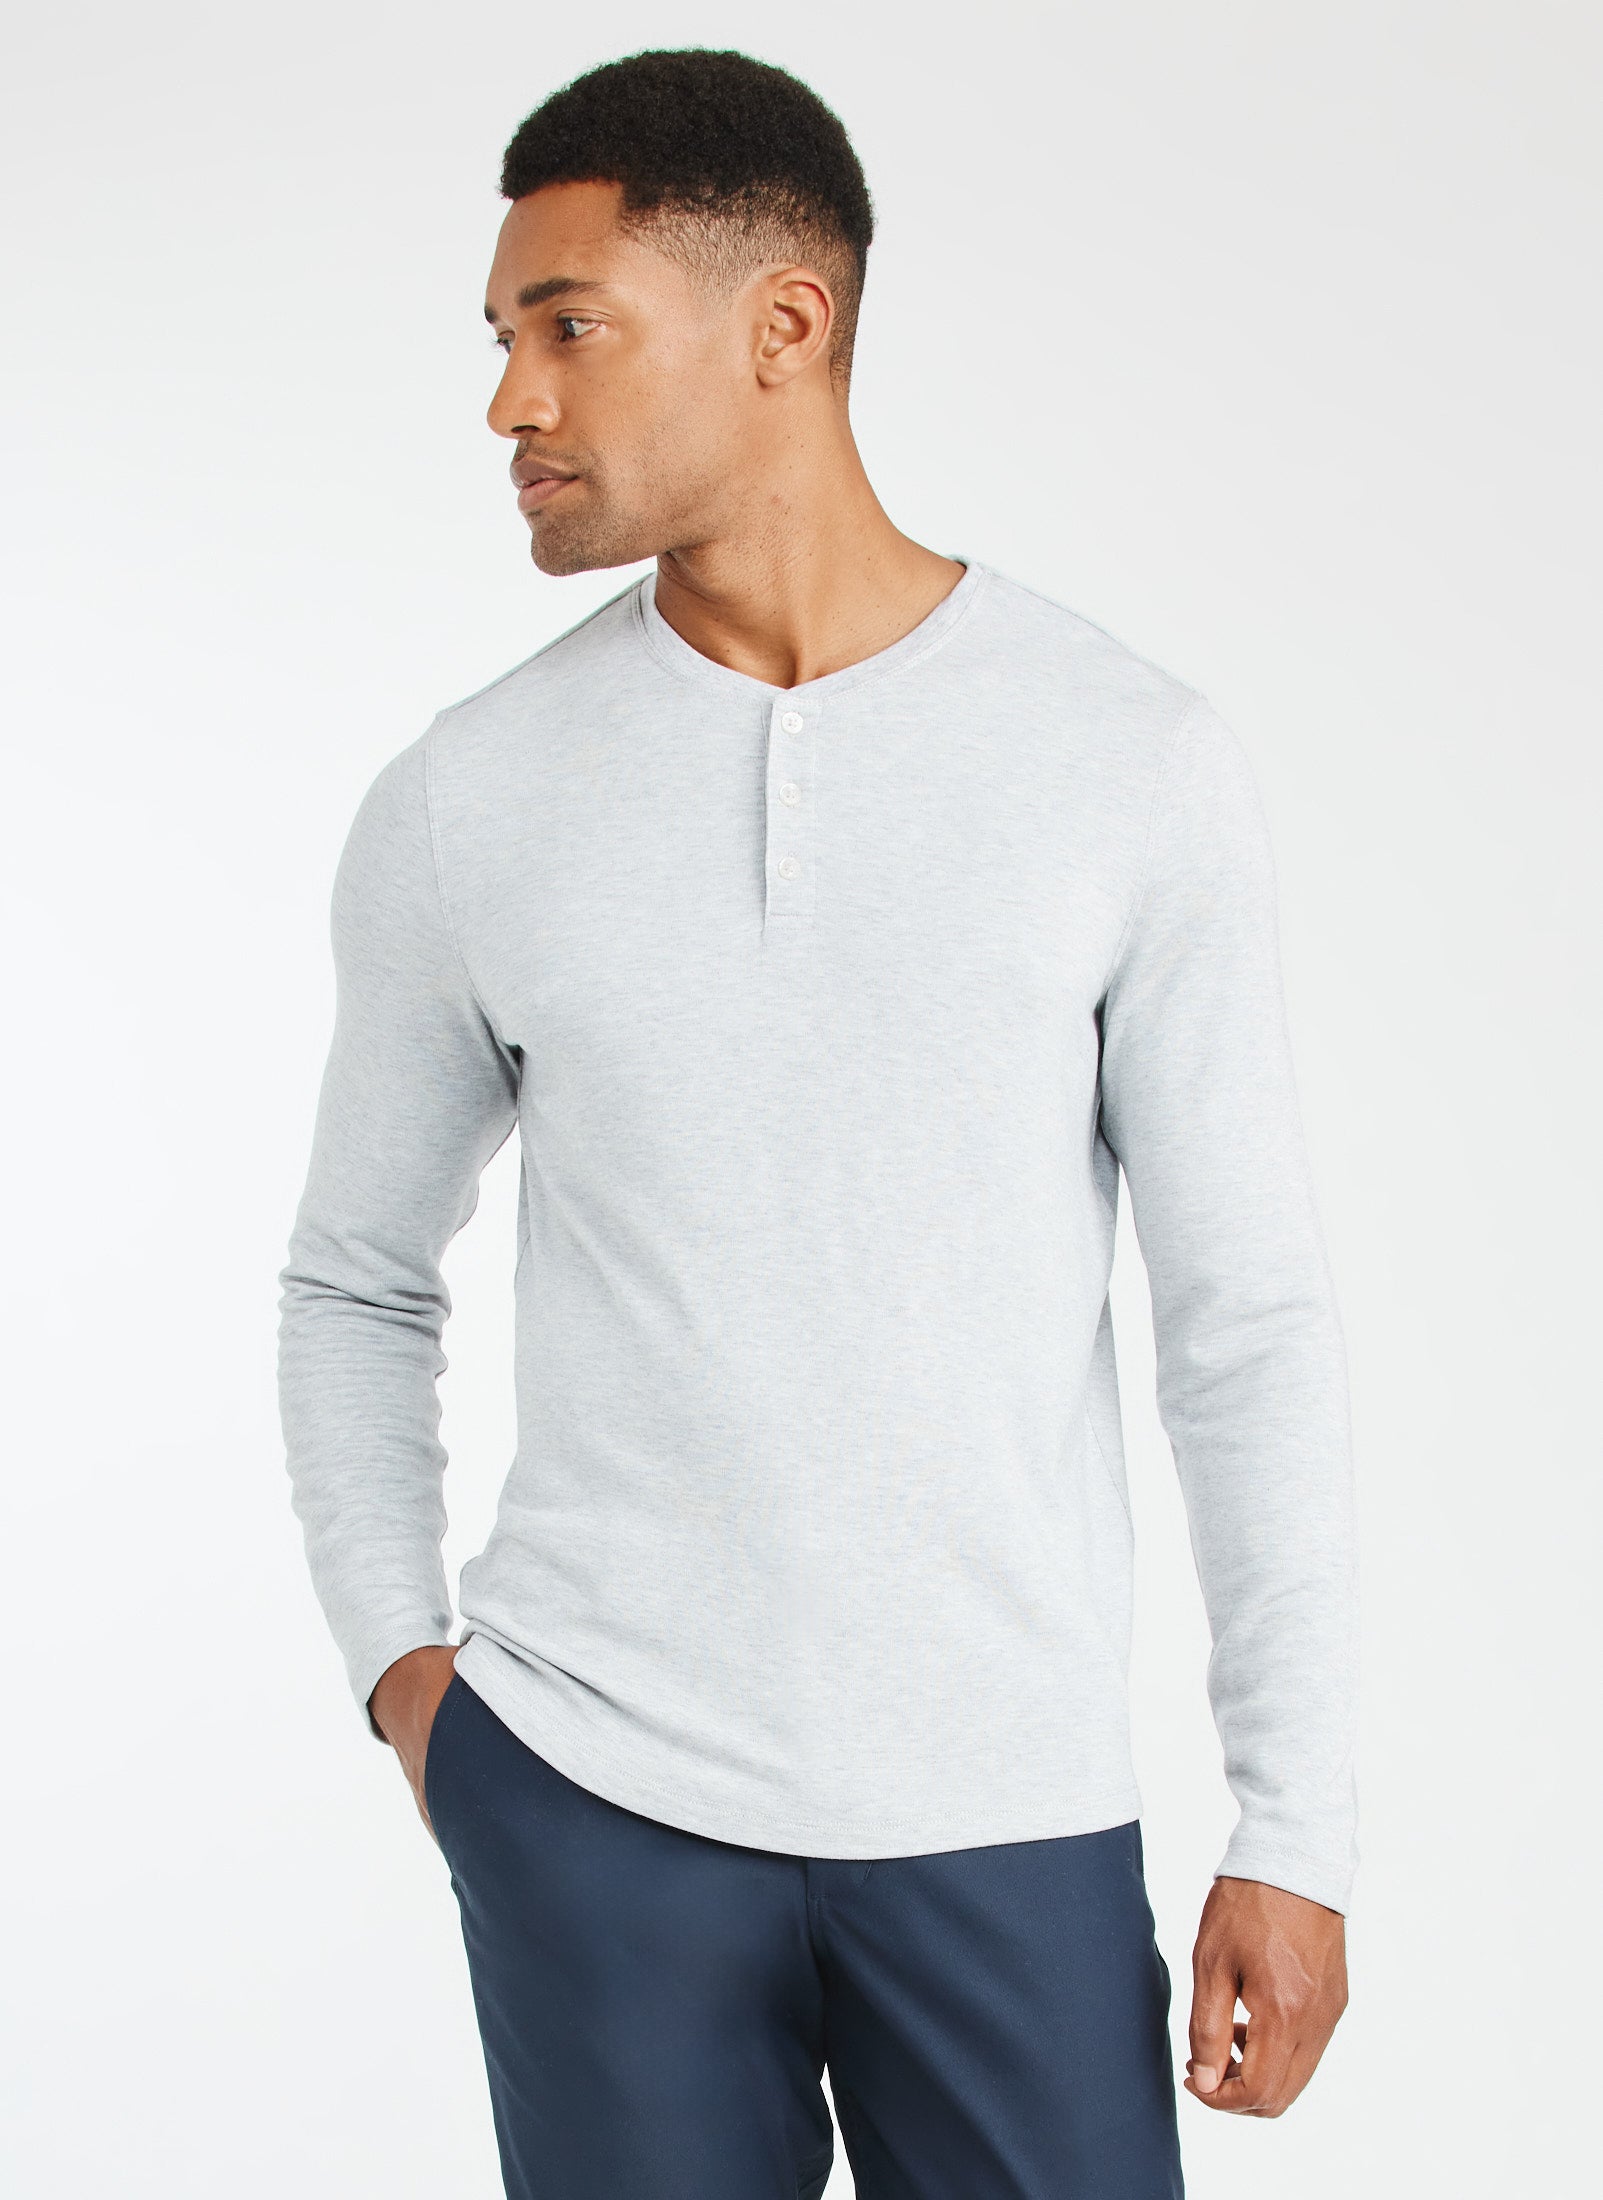 Upgraded Long Sleeve Henley Tee | Men's Tees – Kit and Ace